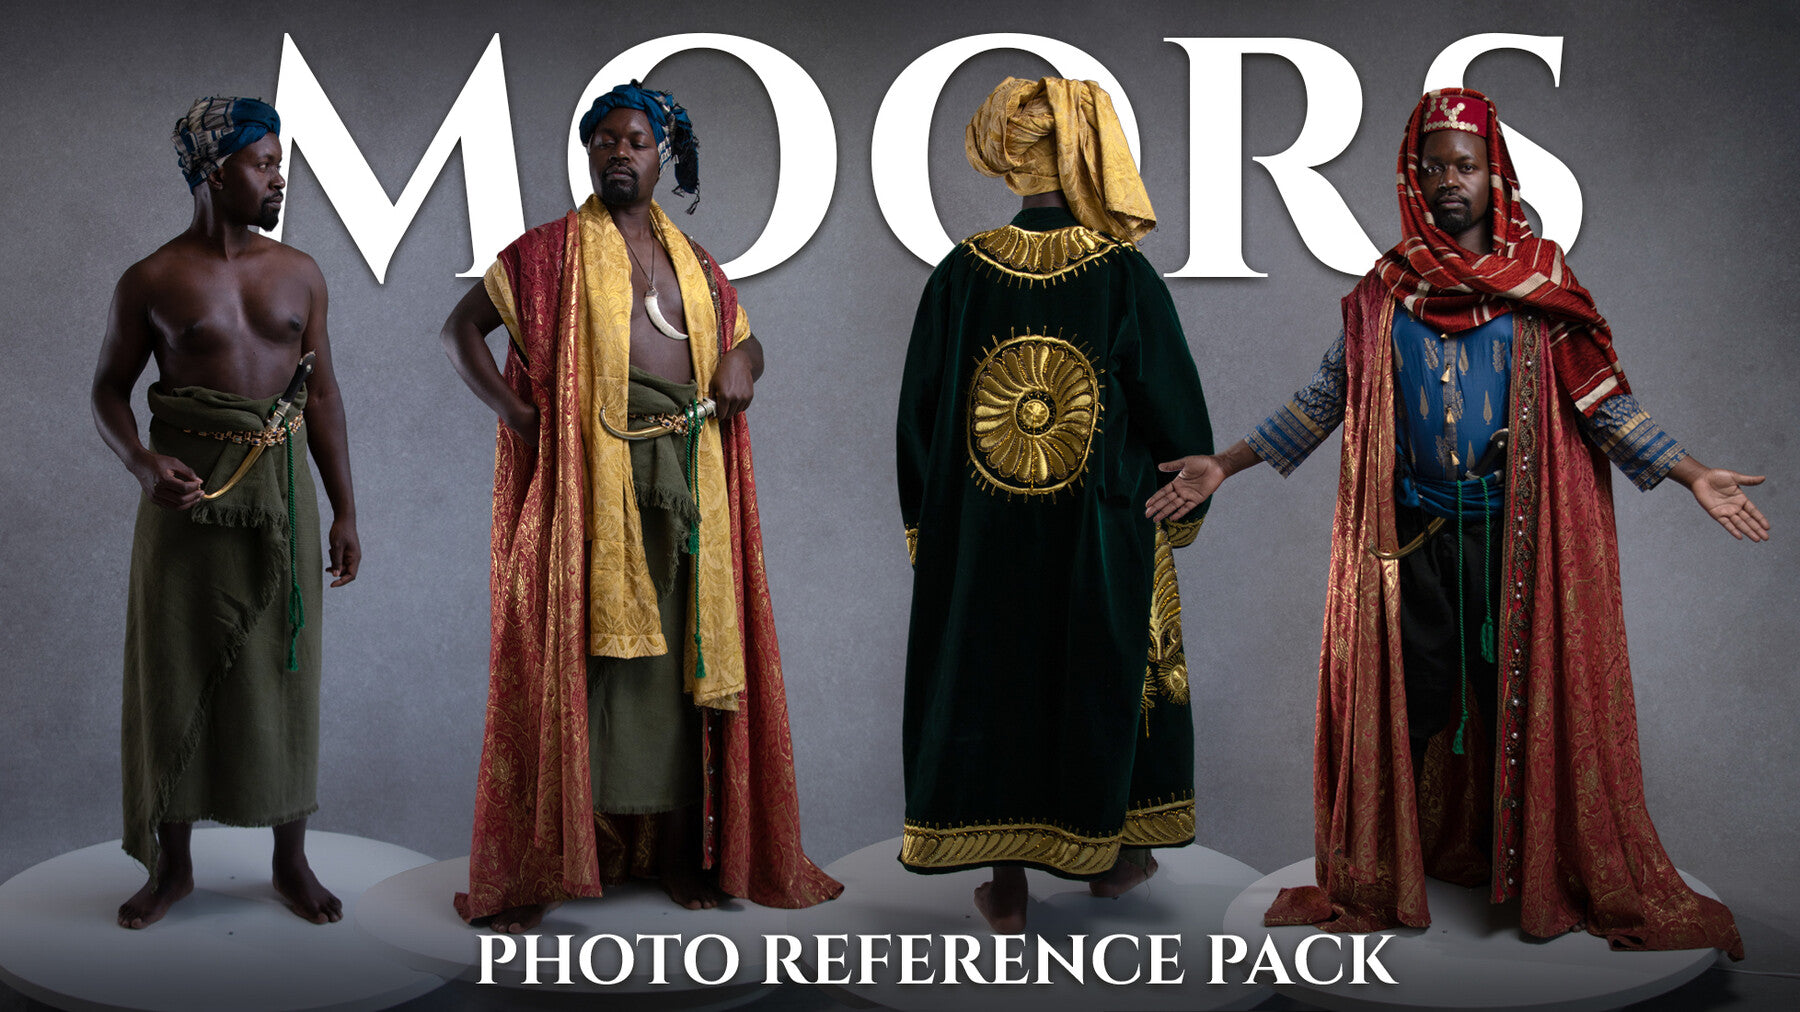 Moors vol.1 Photo Reference Pack For Artists 494 JPEGs